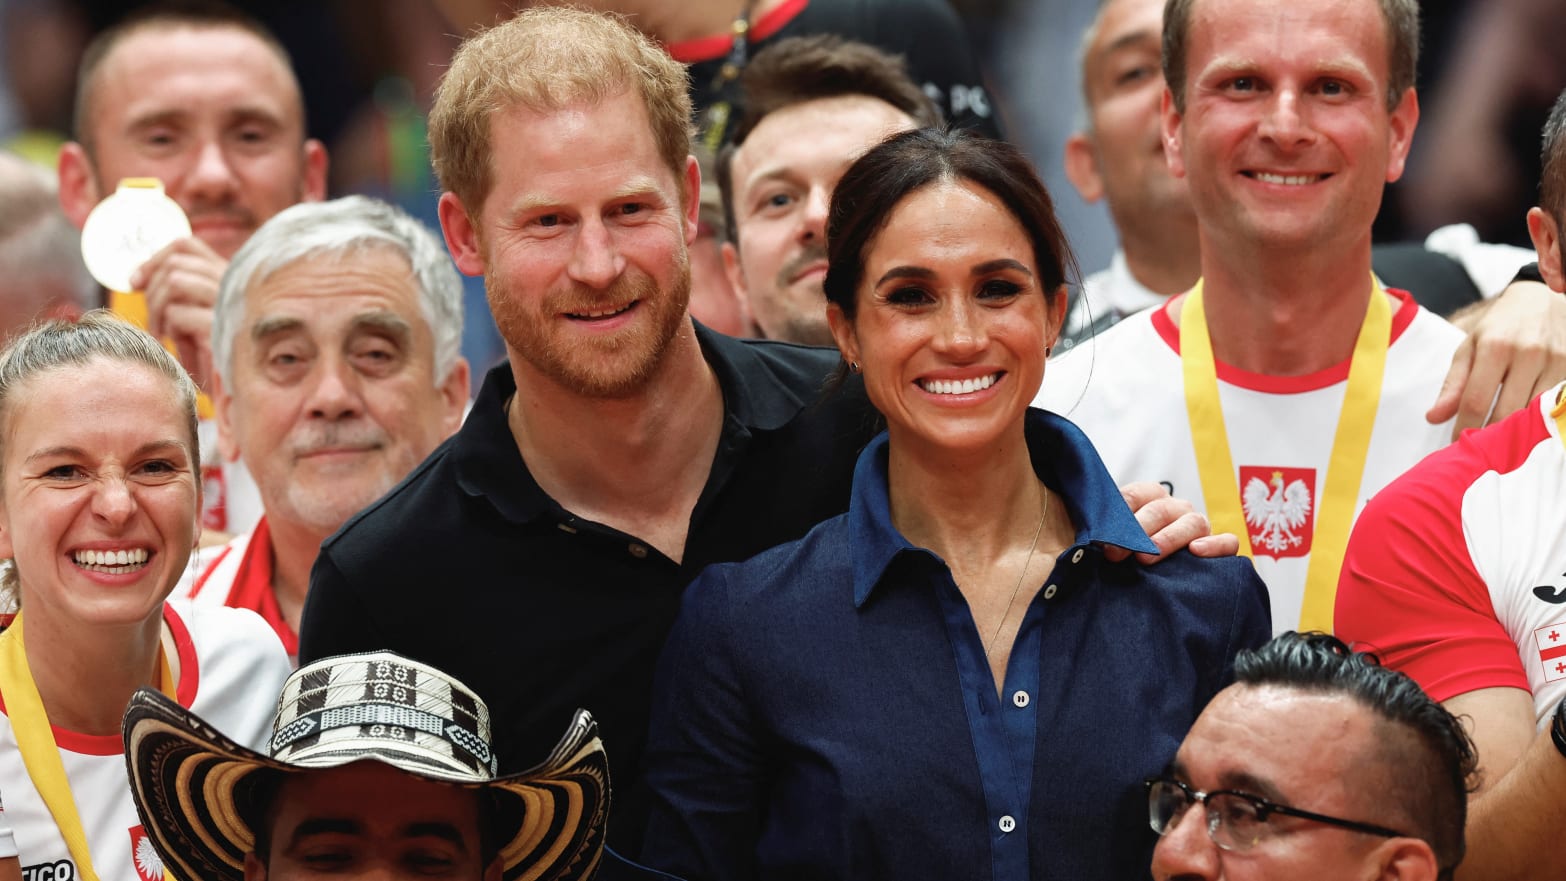 Prince Harry, Duke of Sussex and his wife Meghan